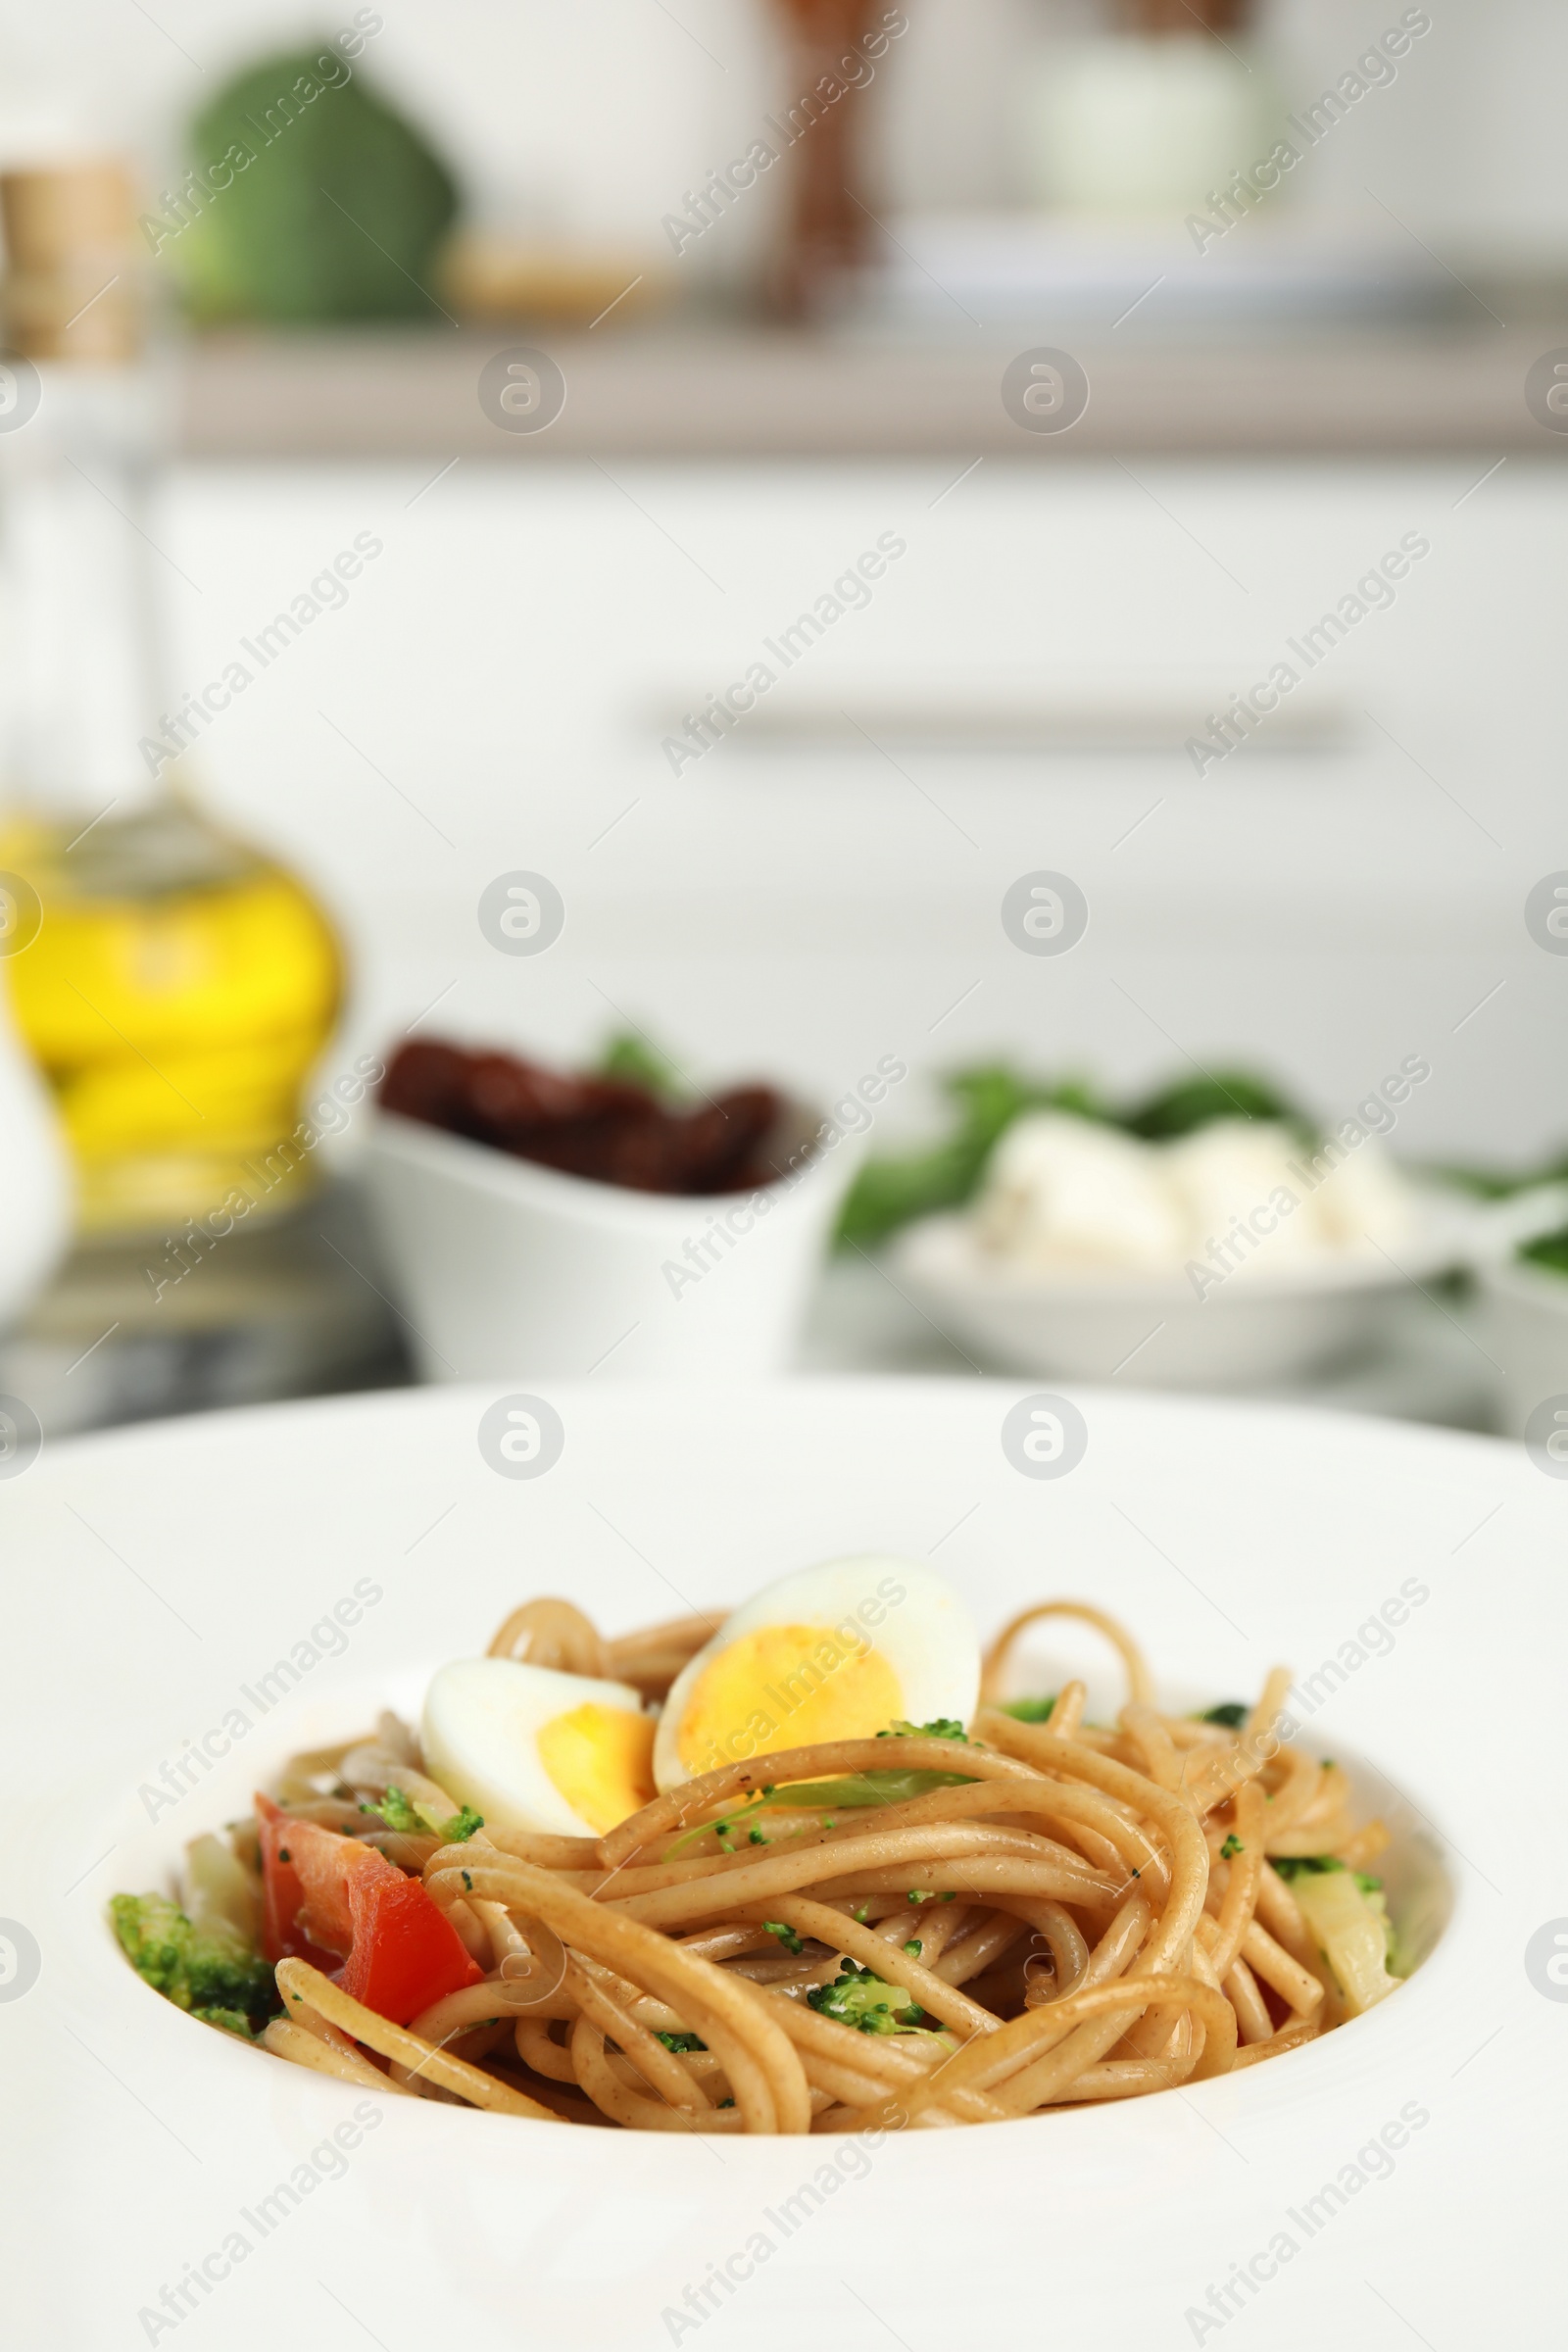 Photo of Tasty buckwheat noodles in plate on table, closeup